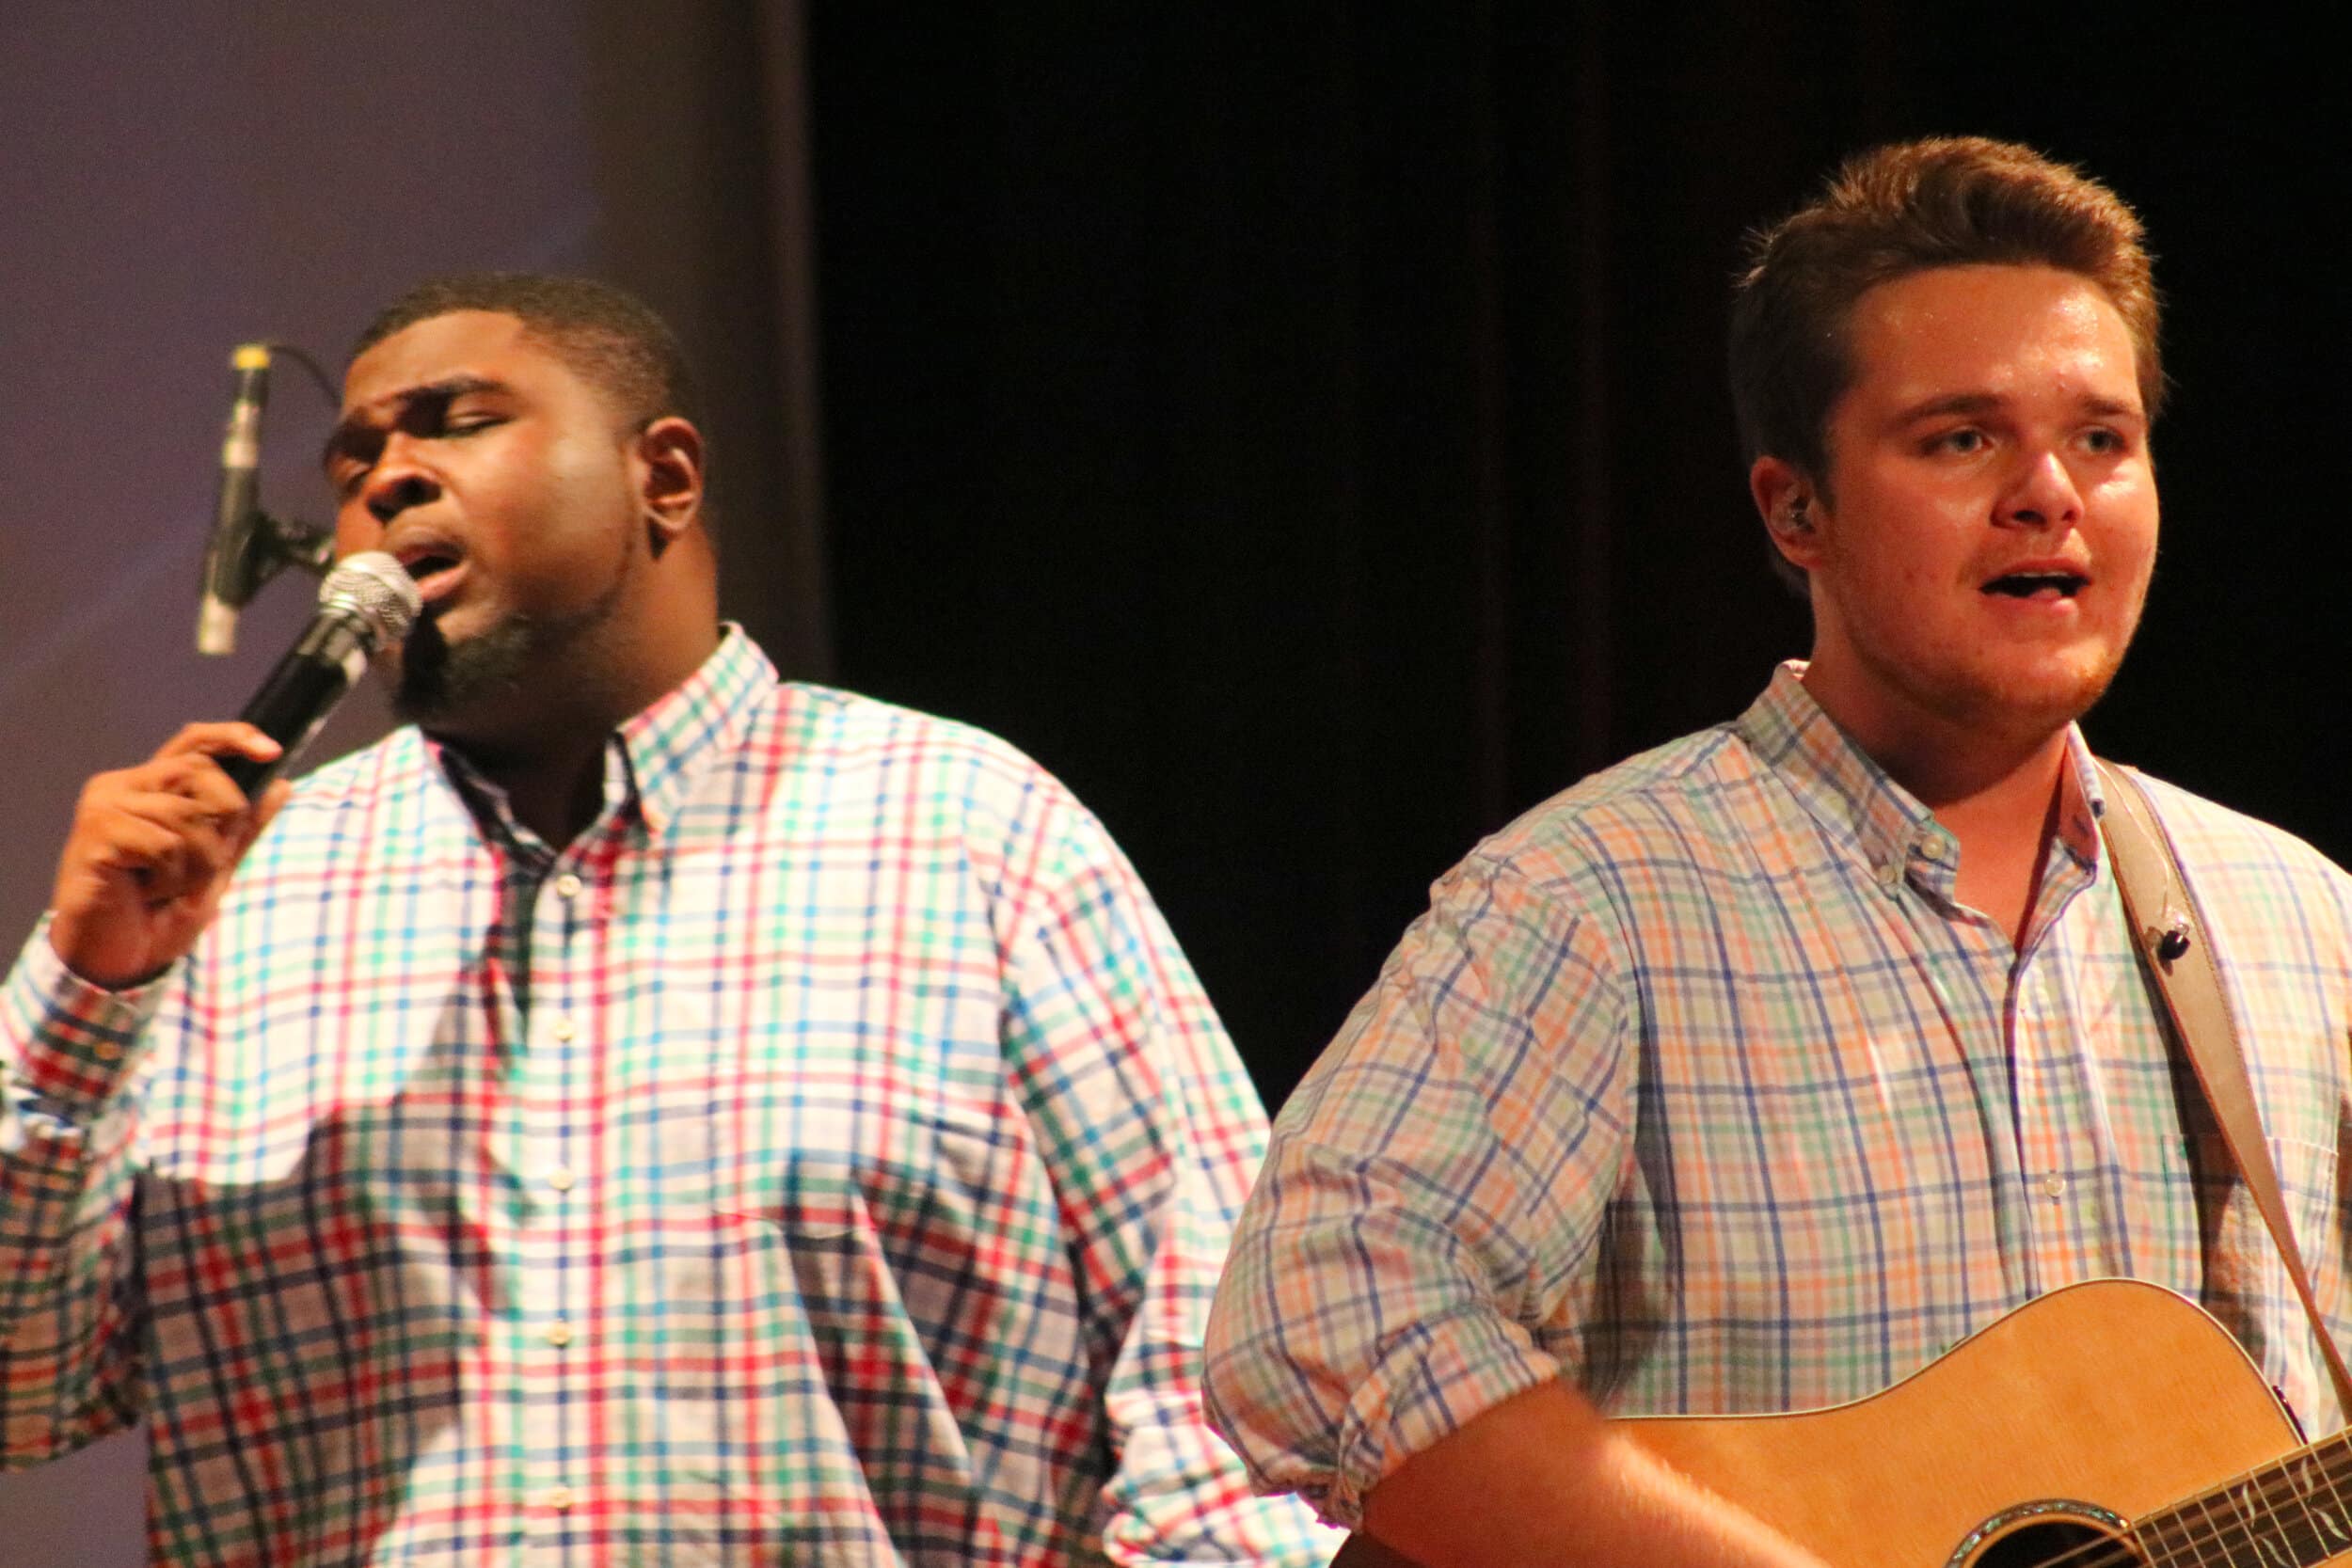 Scotland and Shirk lead worship during the last song, which was Tremble by Mosaic MSC.